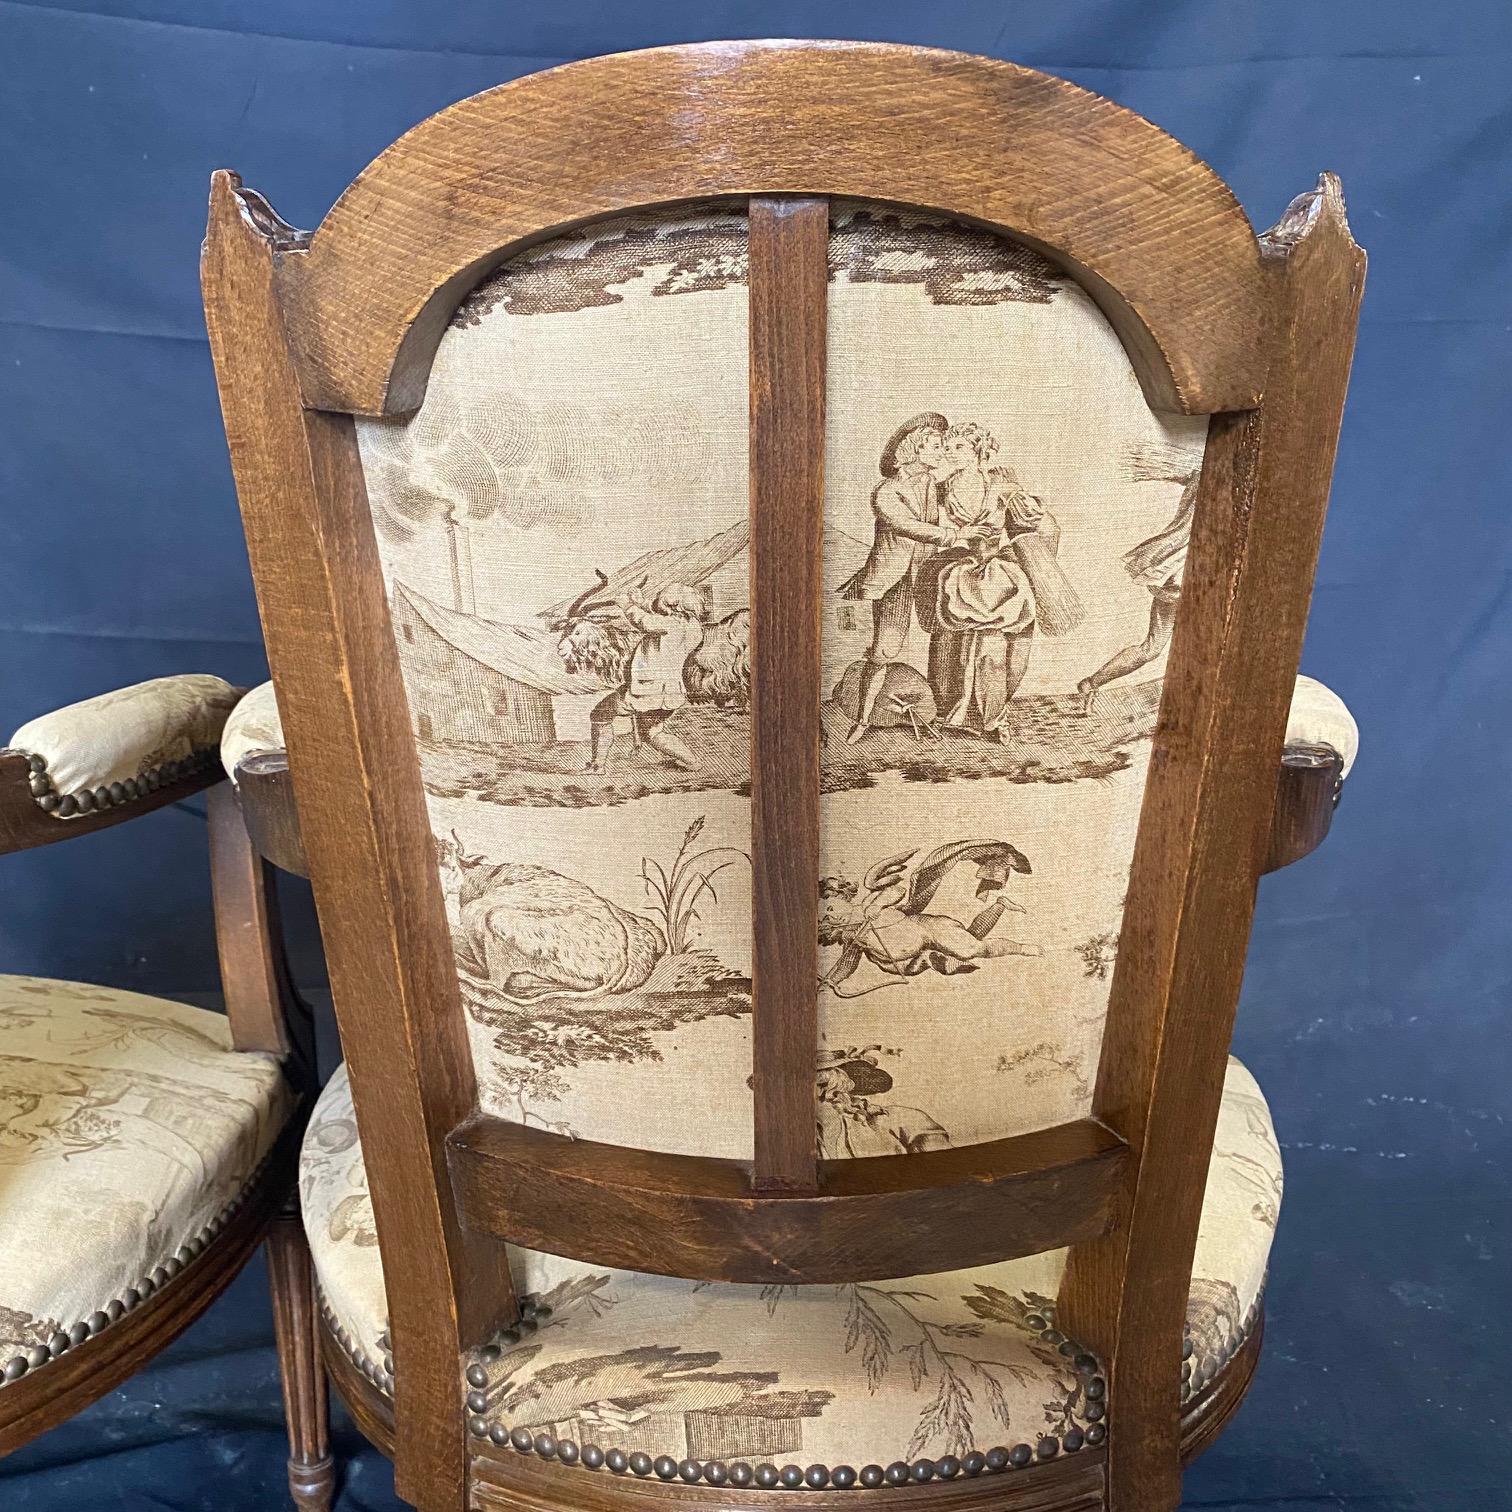 Rarely do you find original upholstery in as good shape as on these stunning early French toile armchairs or fauteuils.  Crafted in the 19th century, these walnut Louis XVI elegant arm chairs will add elegance to any room. A stunning pair of French